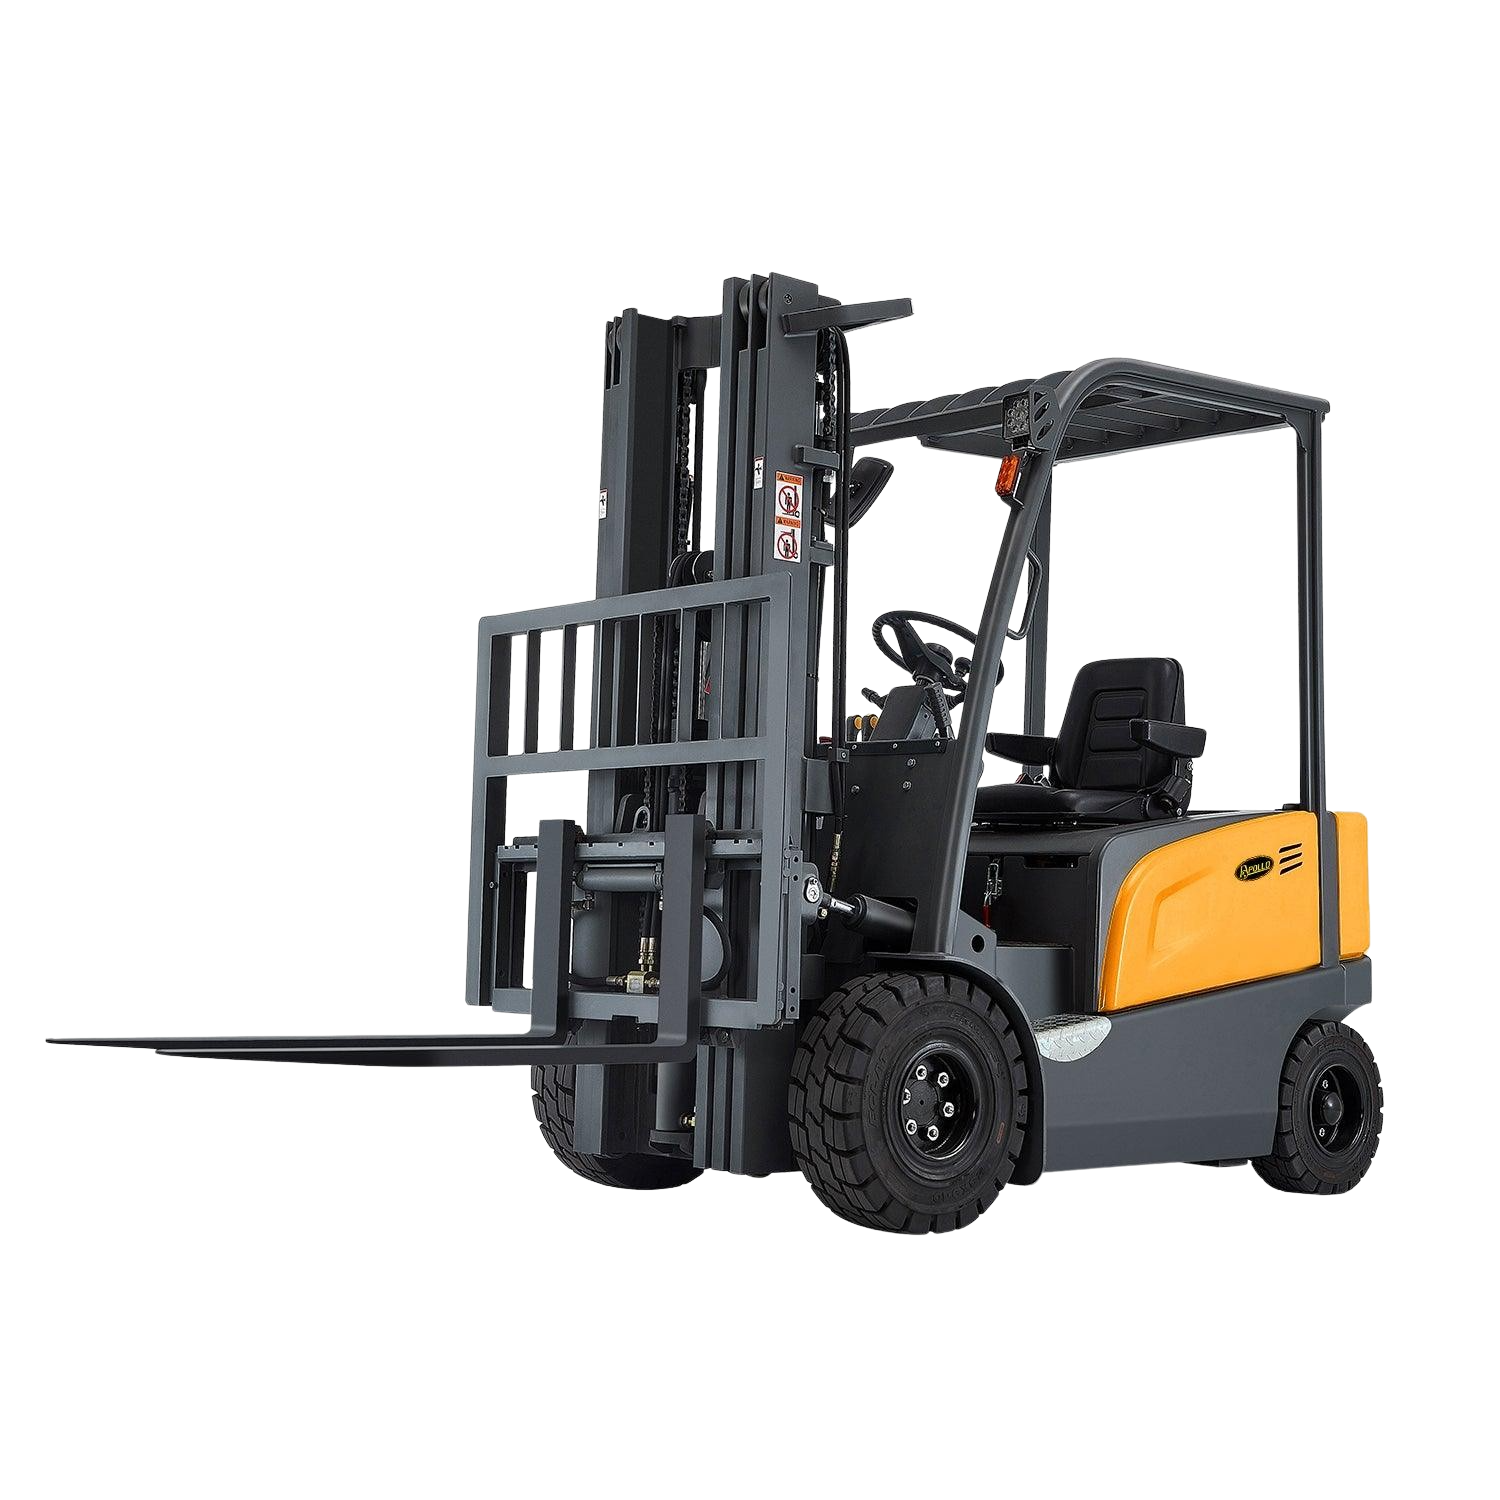 Apollolift A-4001 4 Wheel Electric Forklift 197